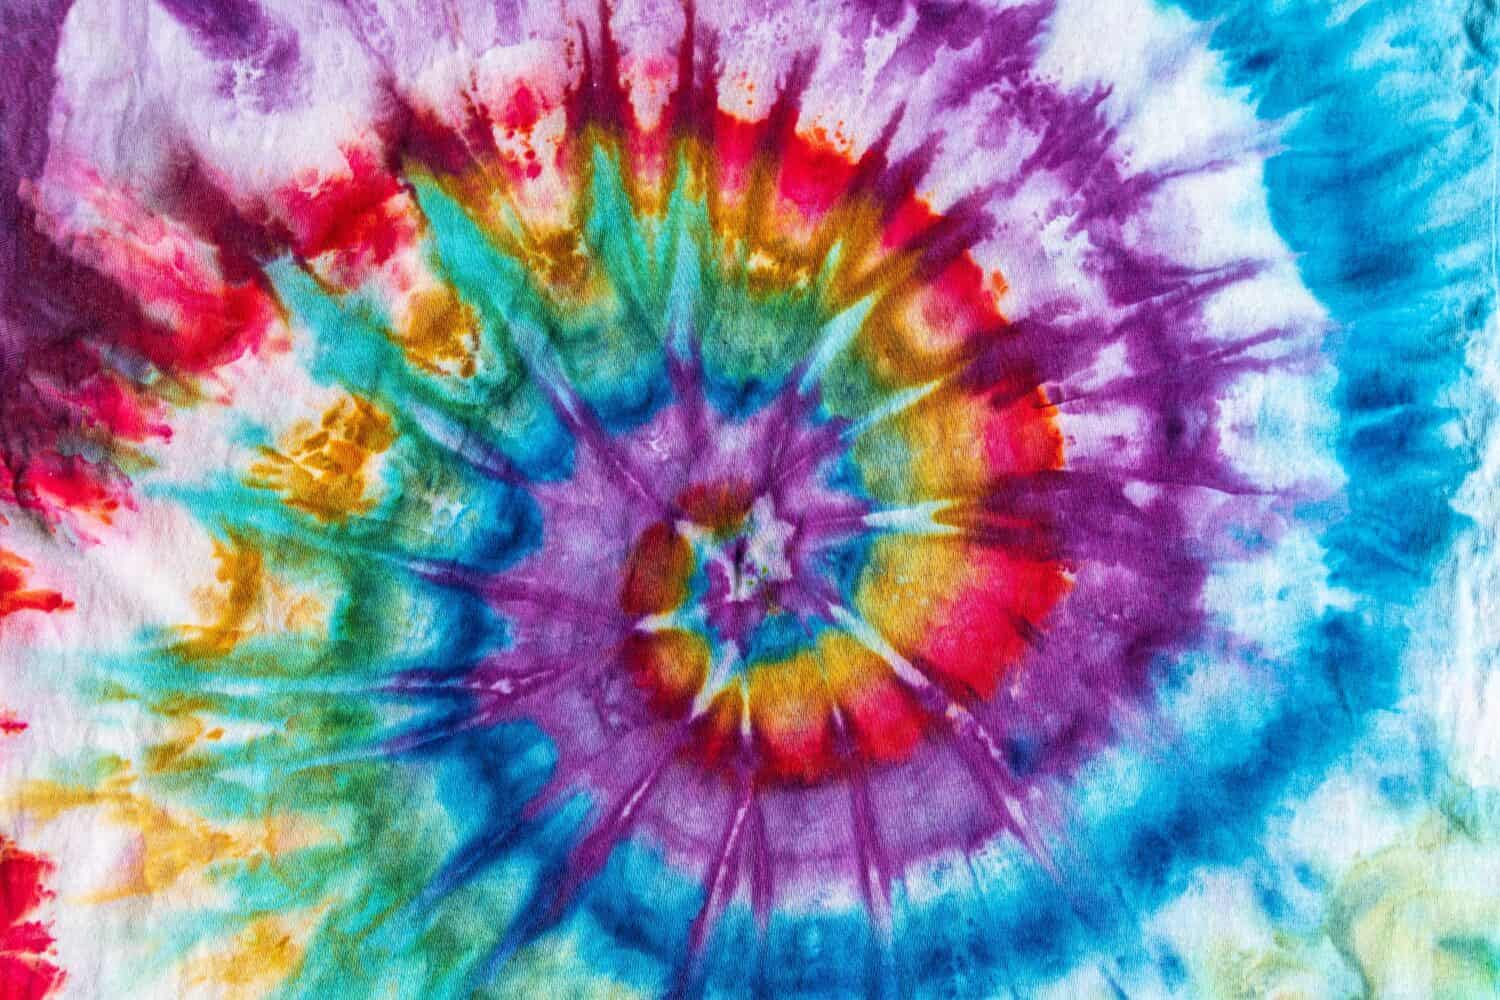 Fashionable Colorful Red, Blue, Yellow Green, Orange, Purple Retro Abstract Psychedelic Tie Dye Swirl Design.